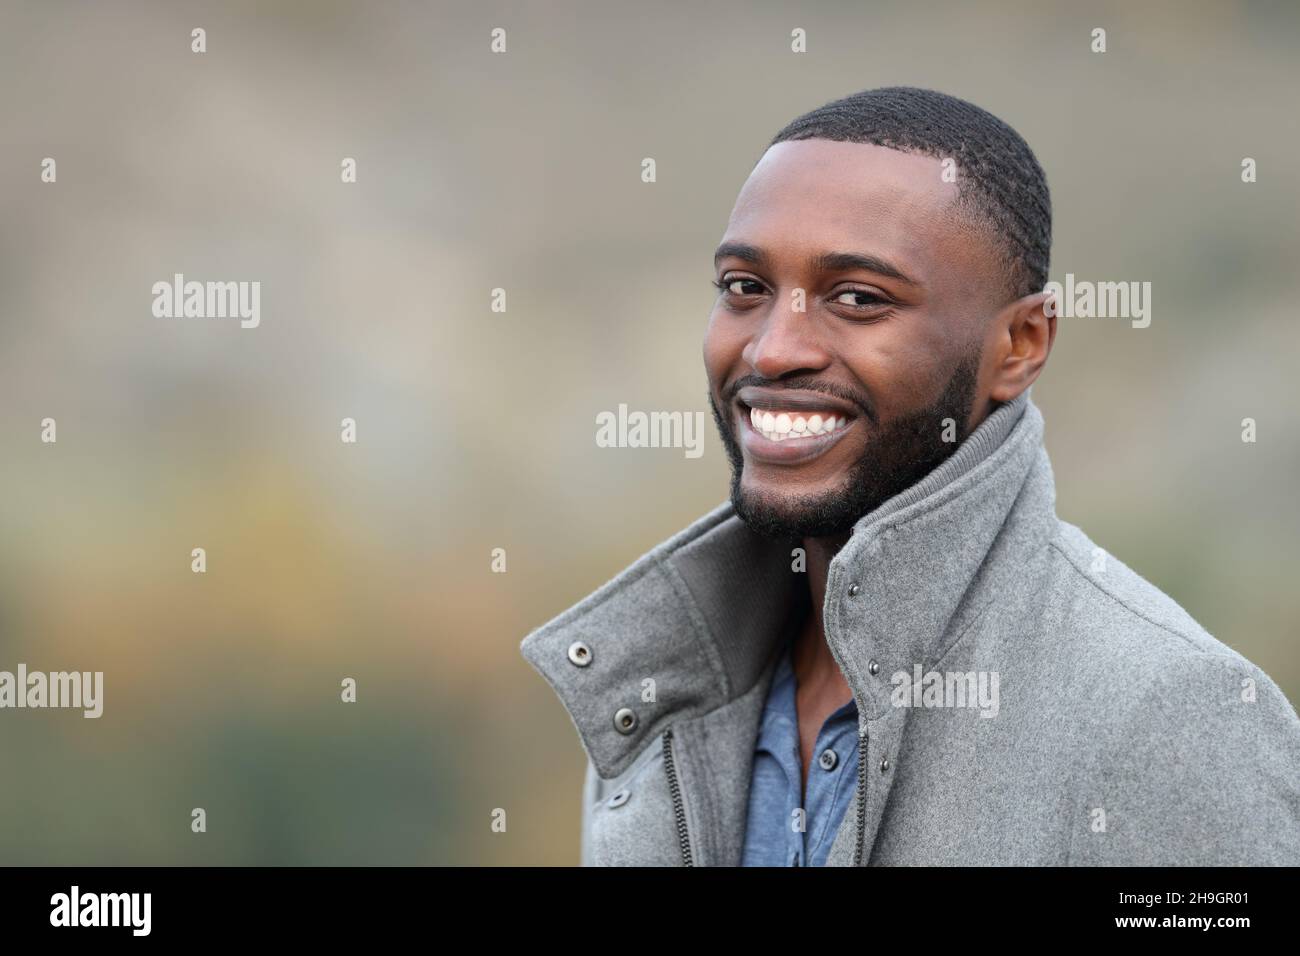 Happy man with black skin looking at you standing outdoors in winter Stock Photo